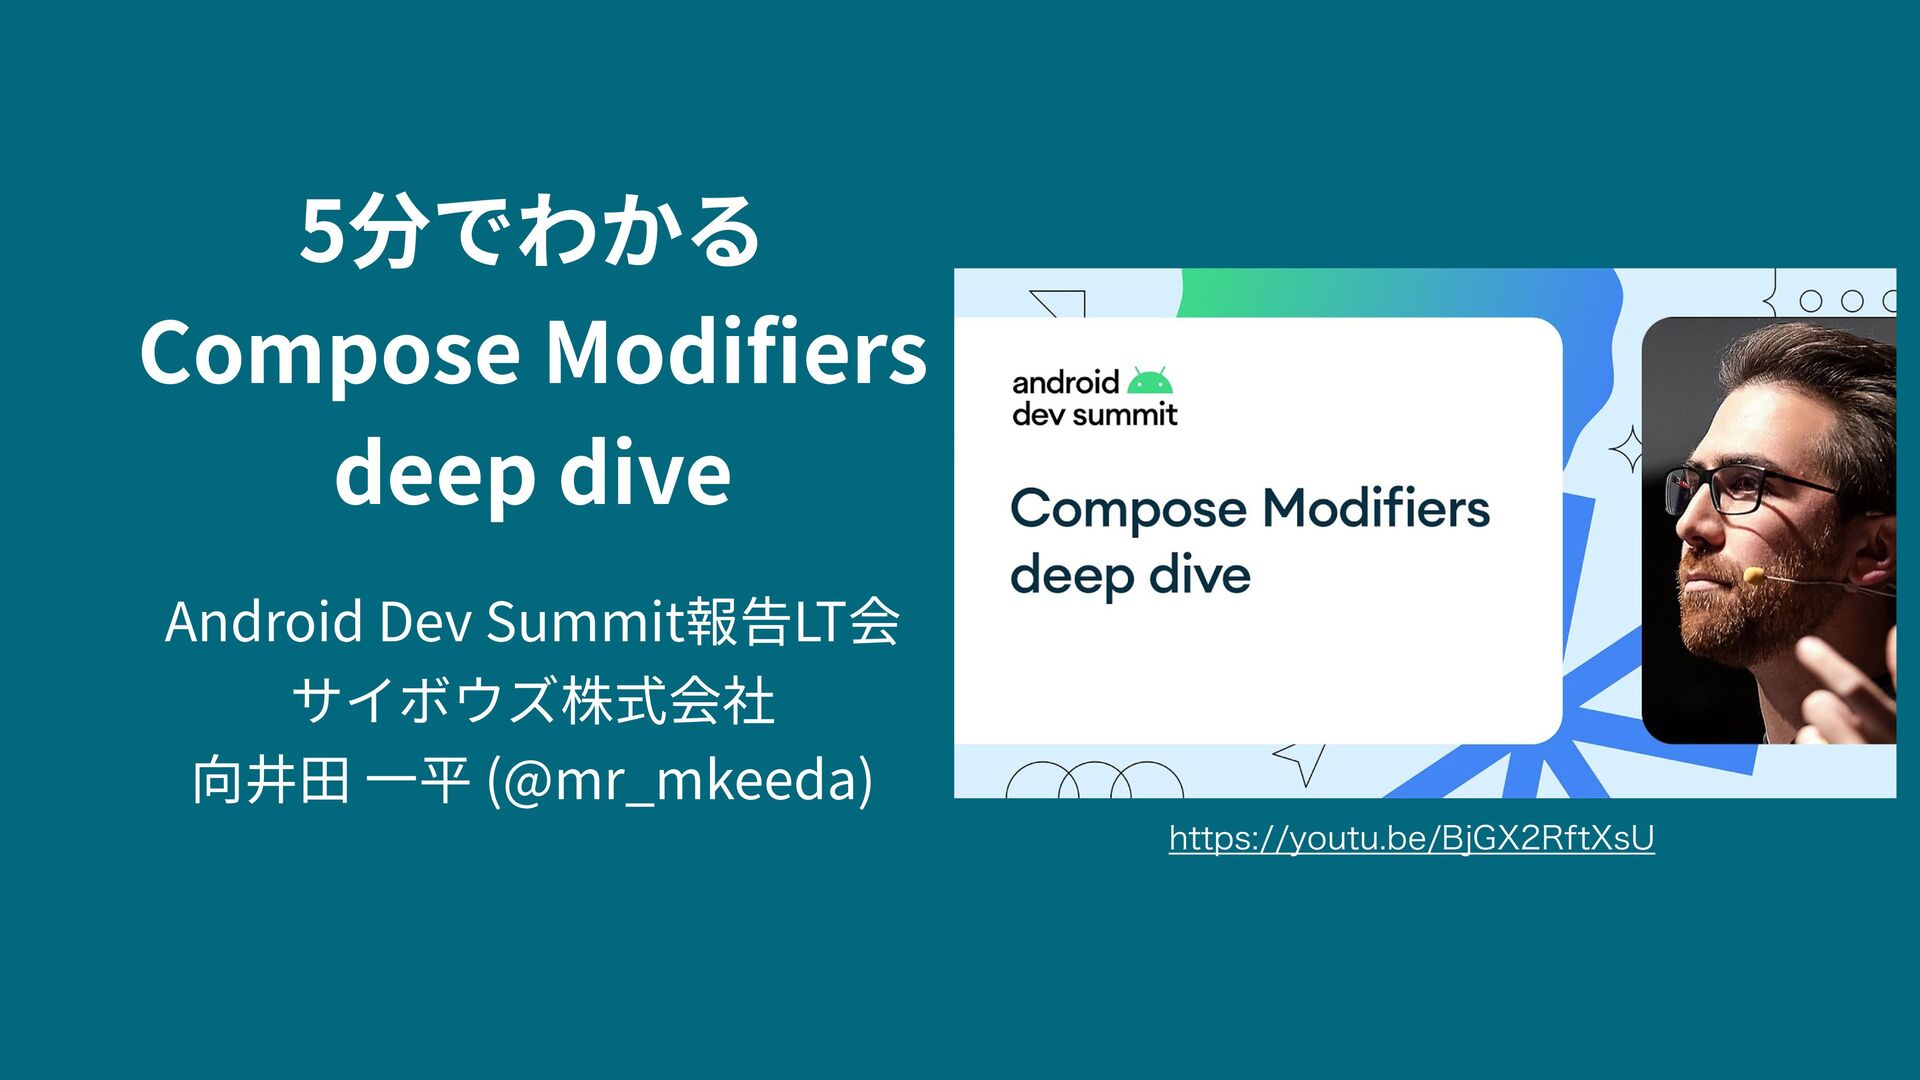 Slide Top: 5分でわかるCompose Modifiers deep dive